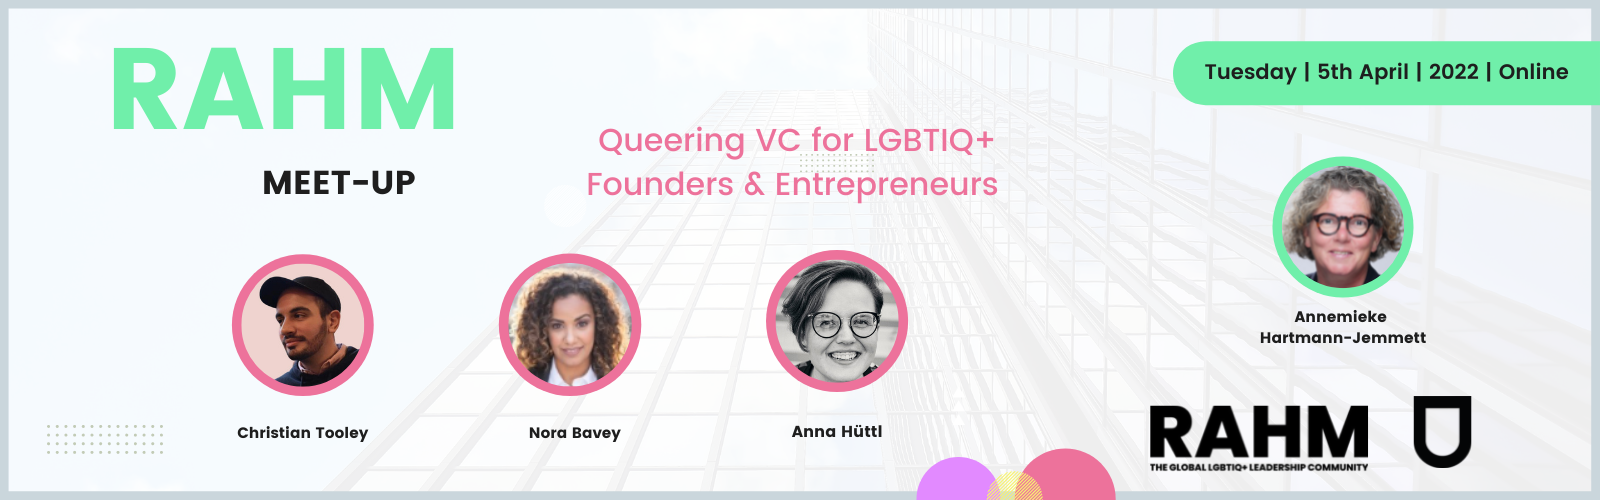 RAHM Meet-up: Queering VC for LGBTIQ+ Founders & Entrepreneurs